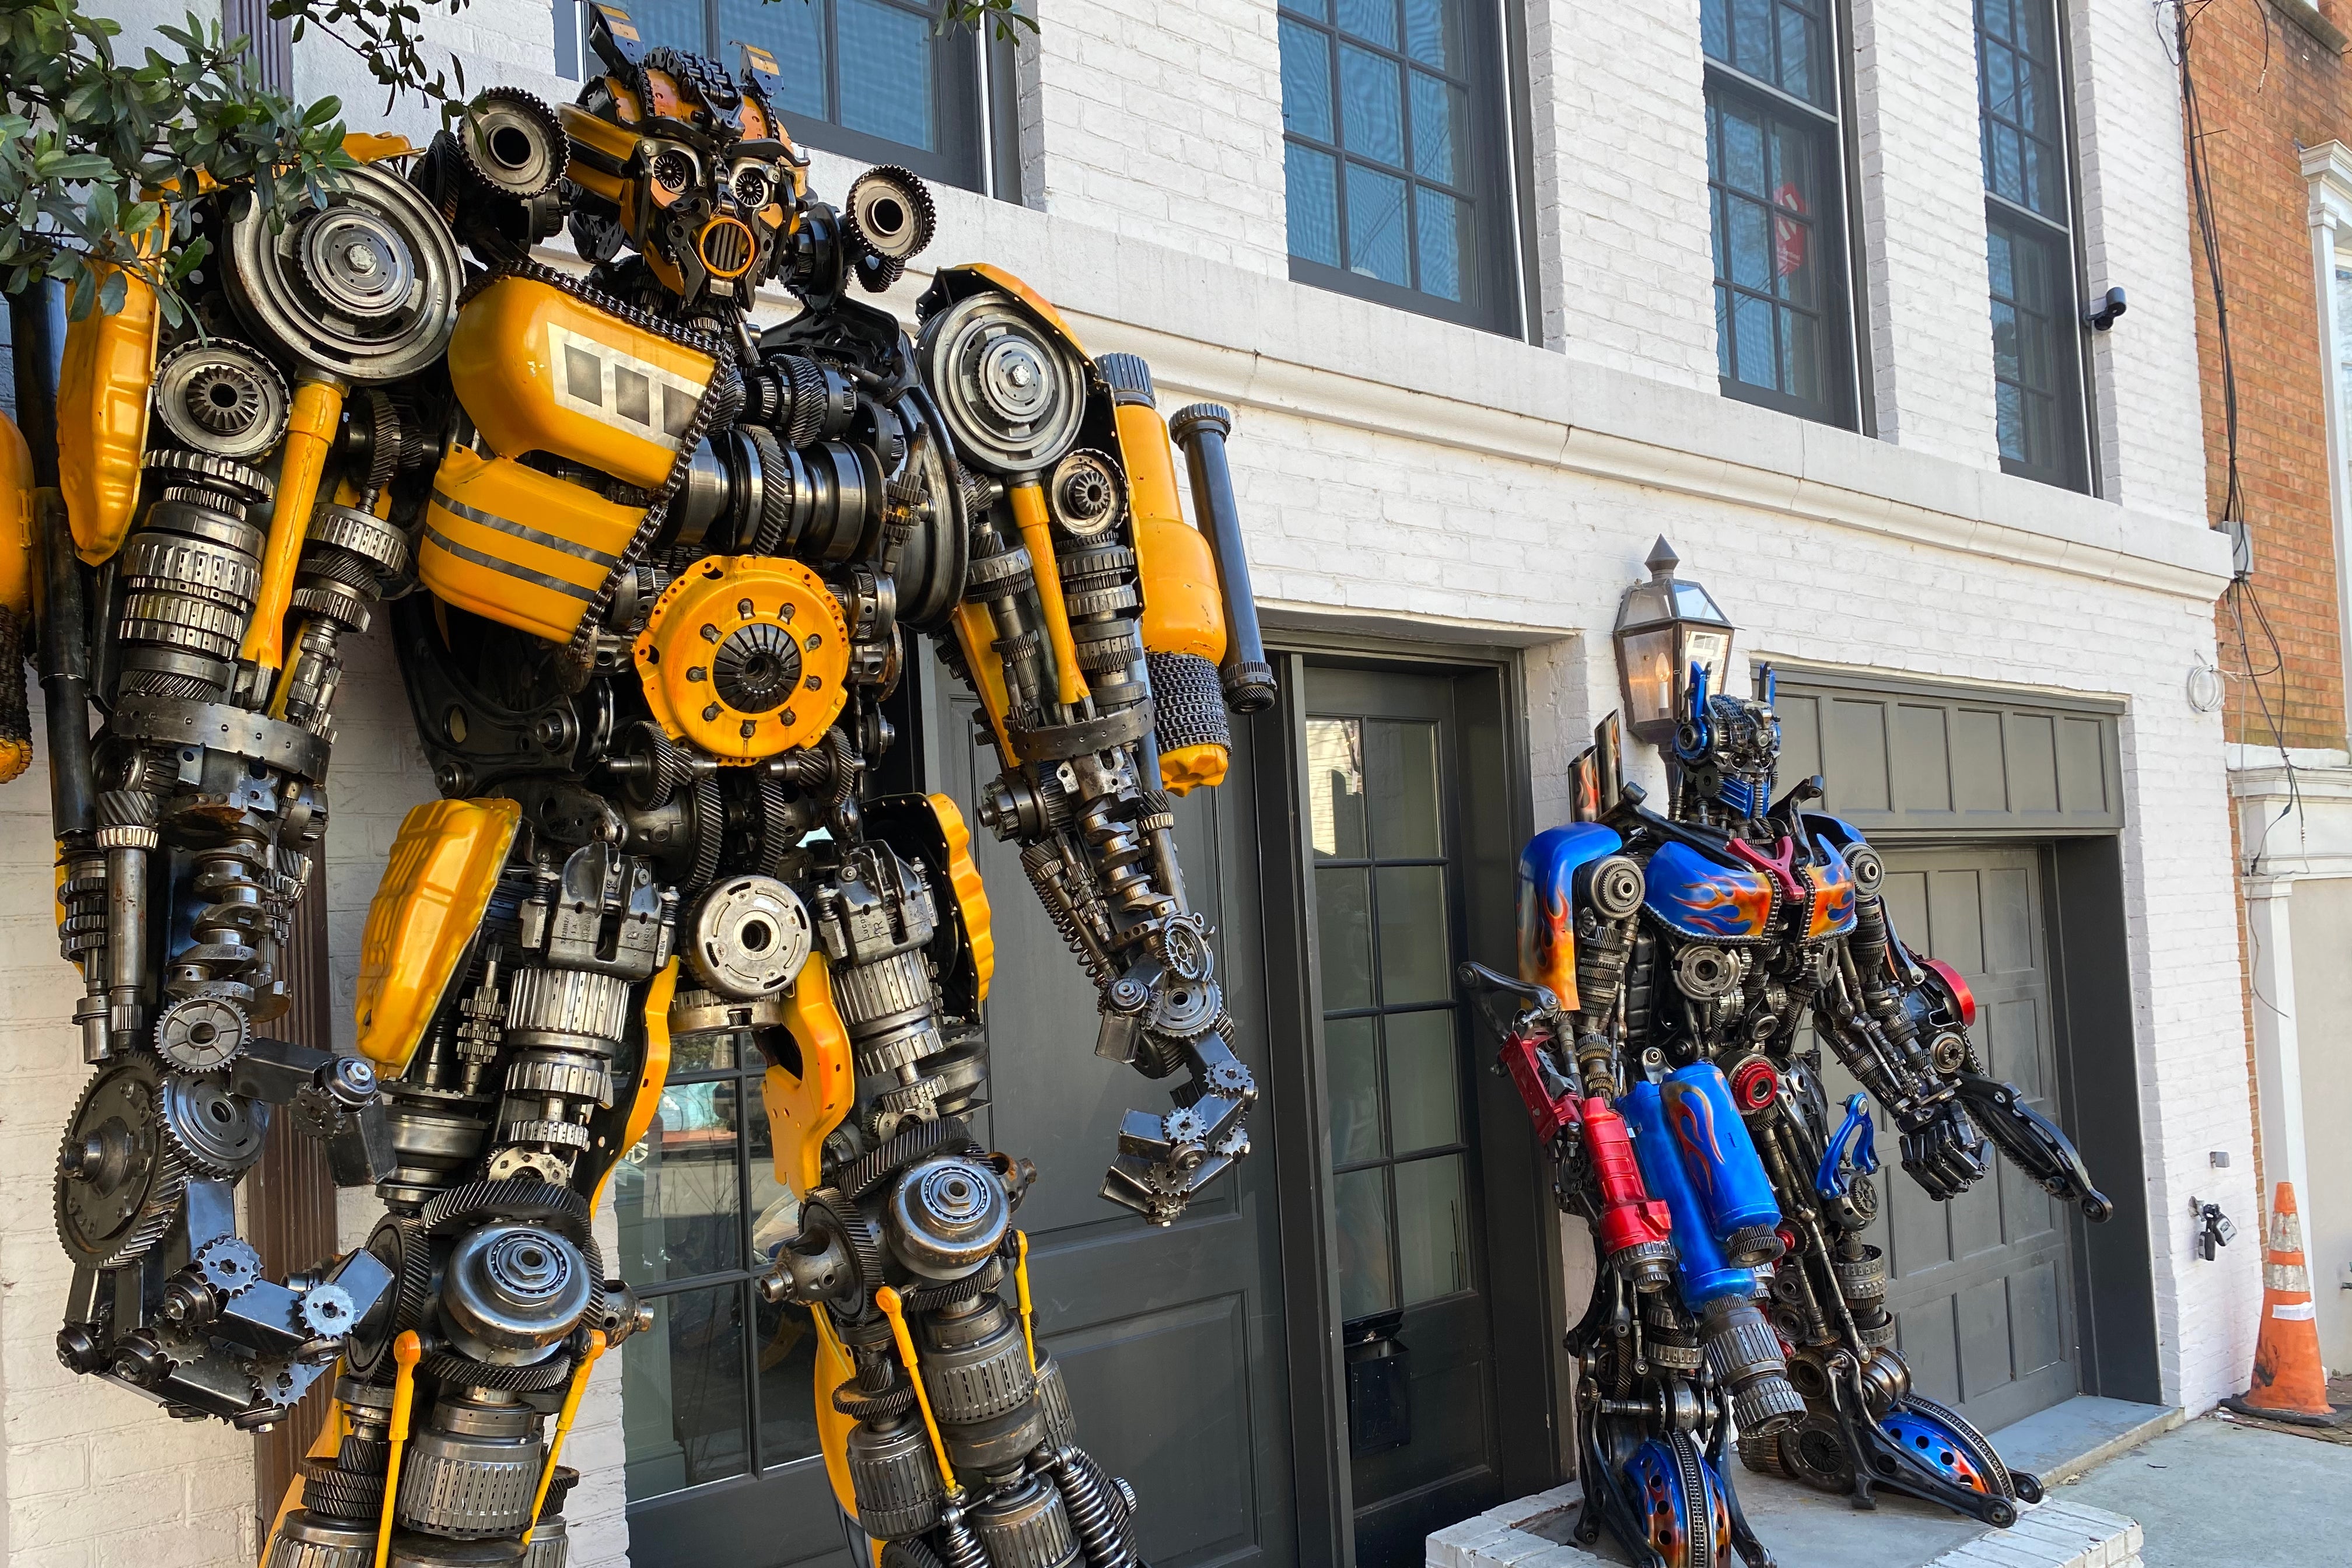 Two large robot statues flank the front door of a white Georgetown row house.